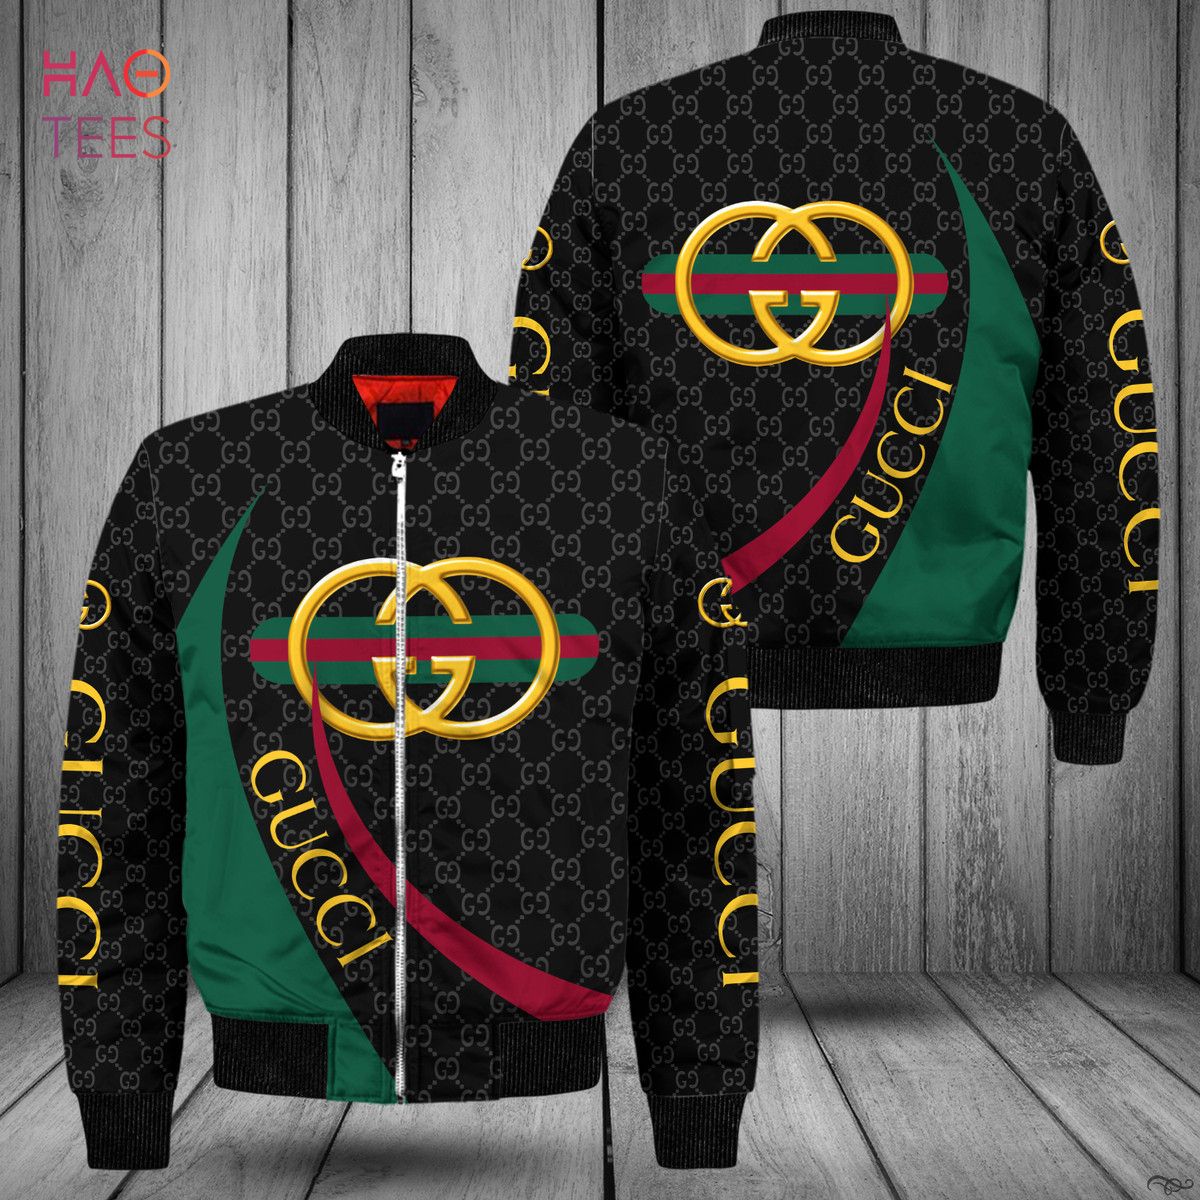 HOT Gucci Luxury Brand Green Mix Black Bomber Jacket Limited Edition